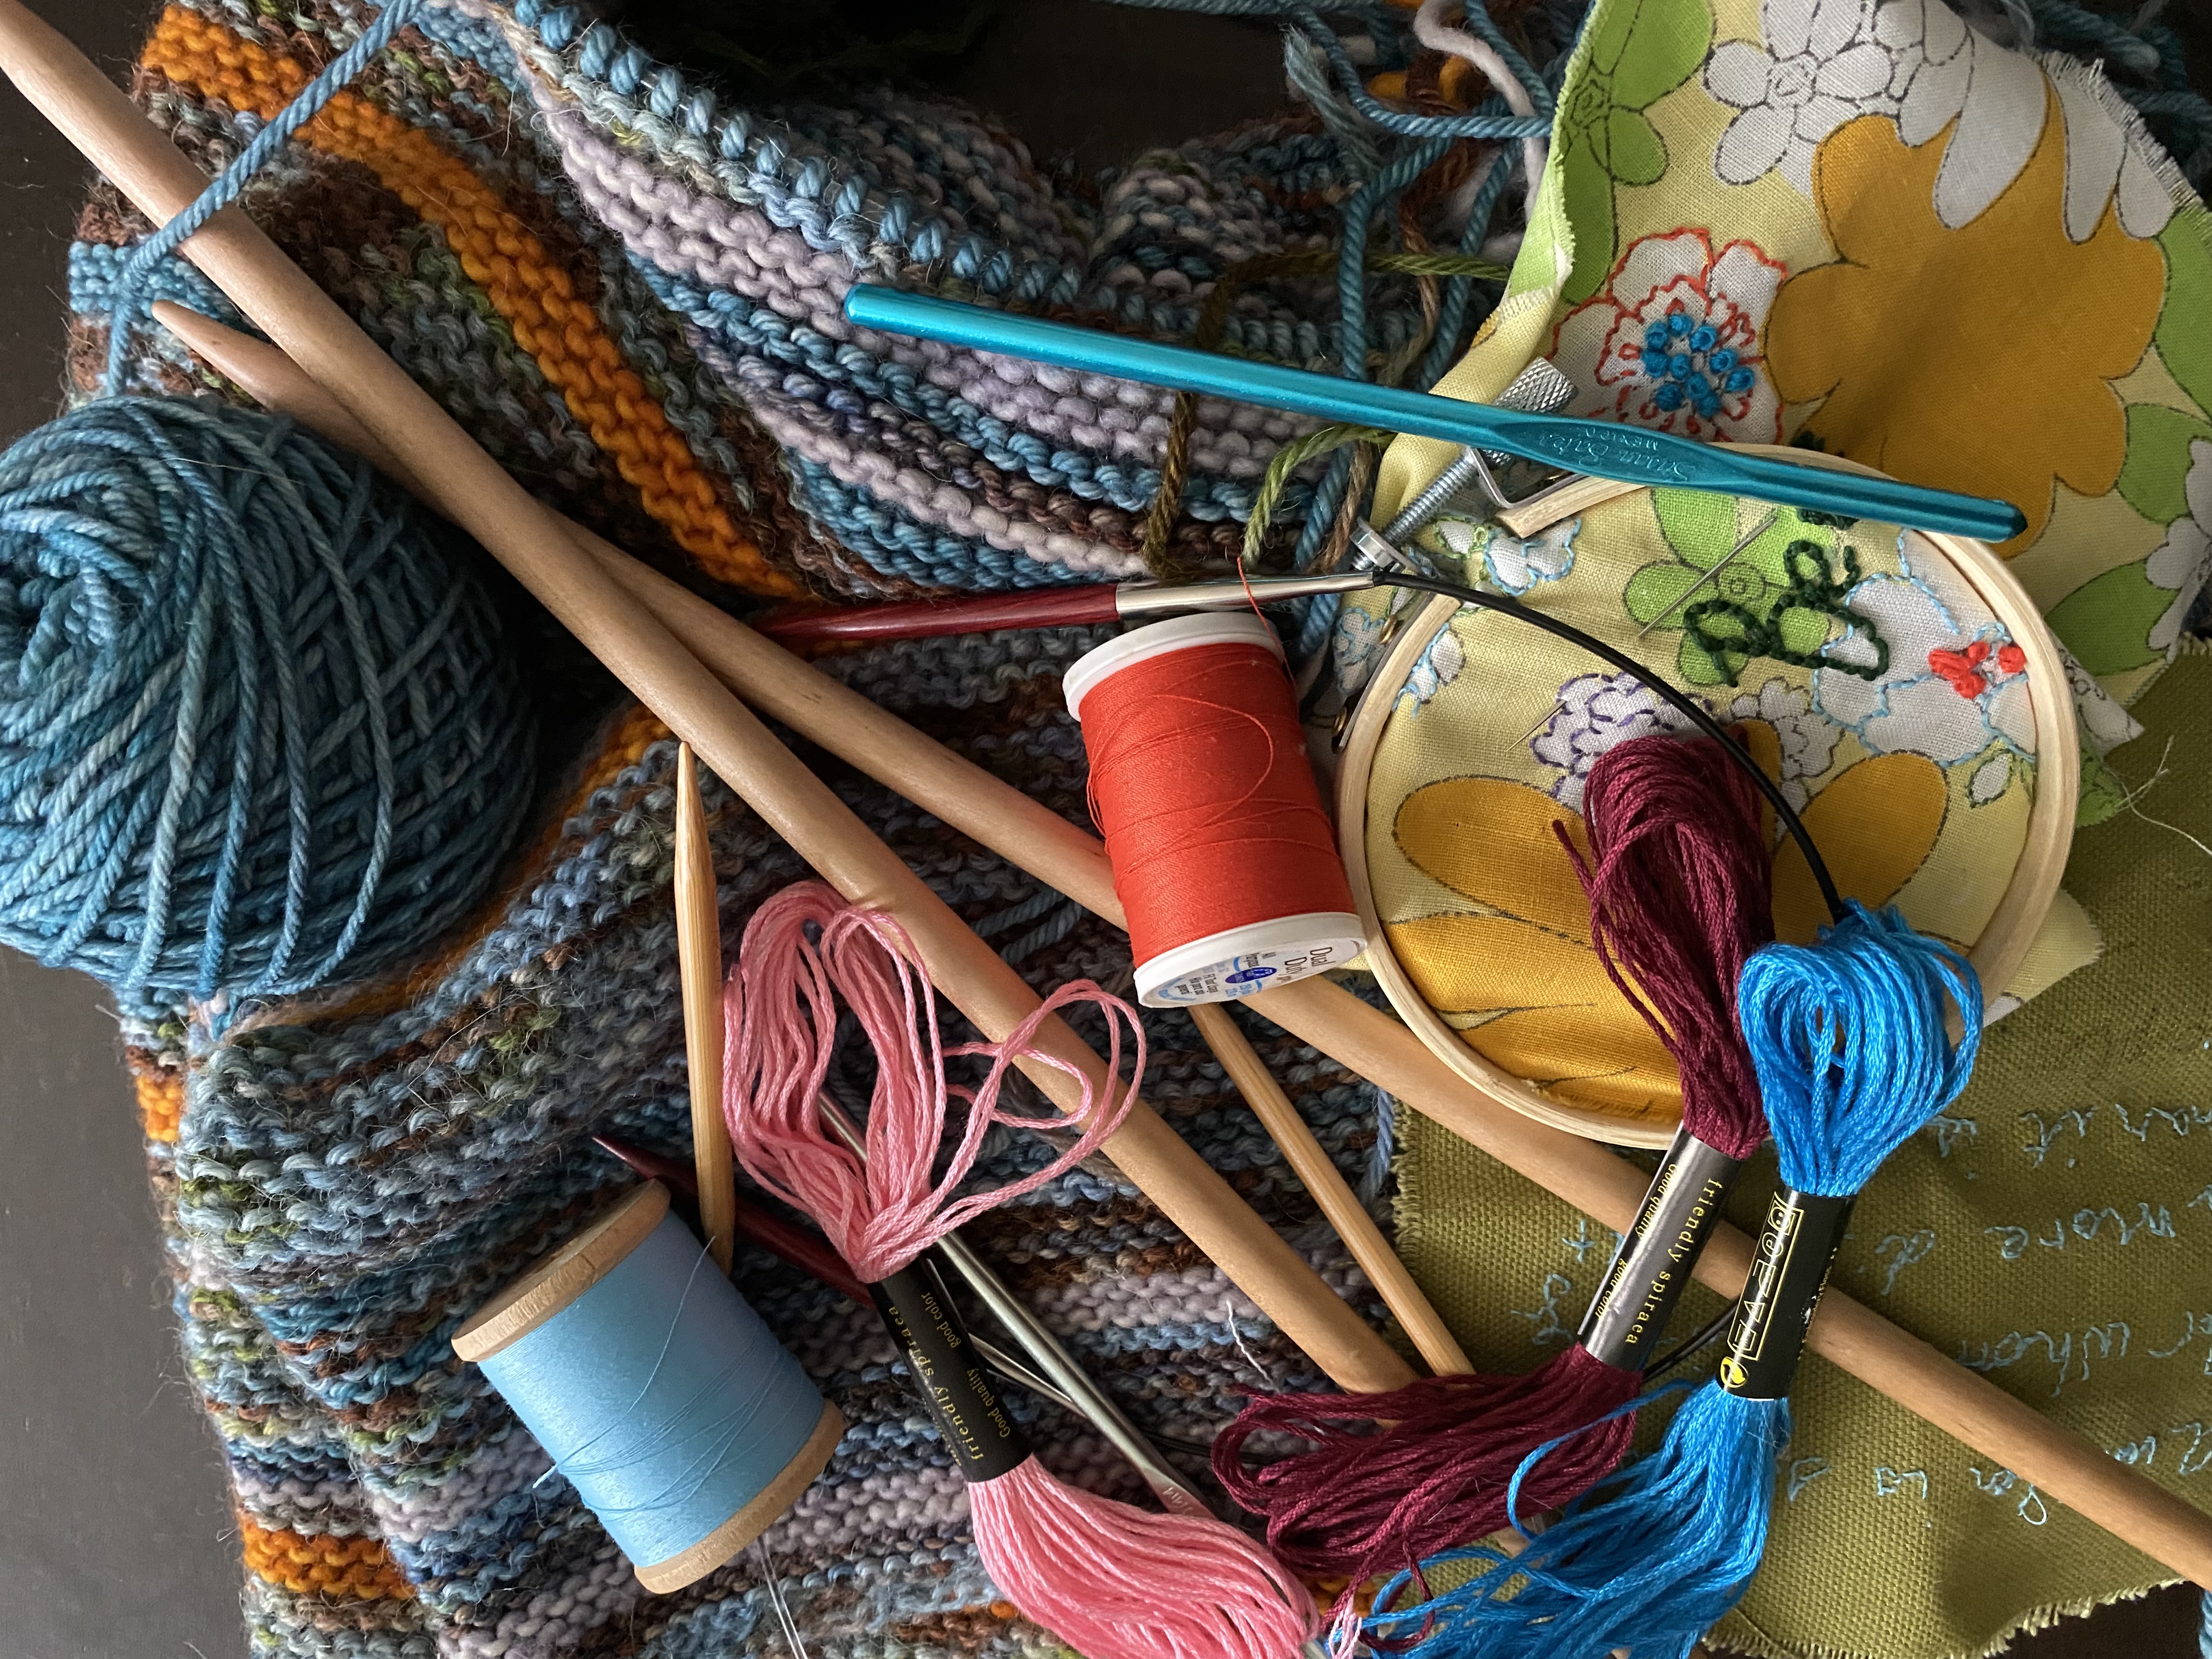 image of yarn, knitting needles, crochet hooks, spools of thread, embroidery thread and hoop, and knitting in progress. , and a  